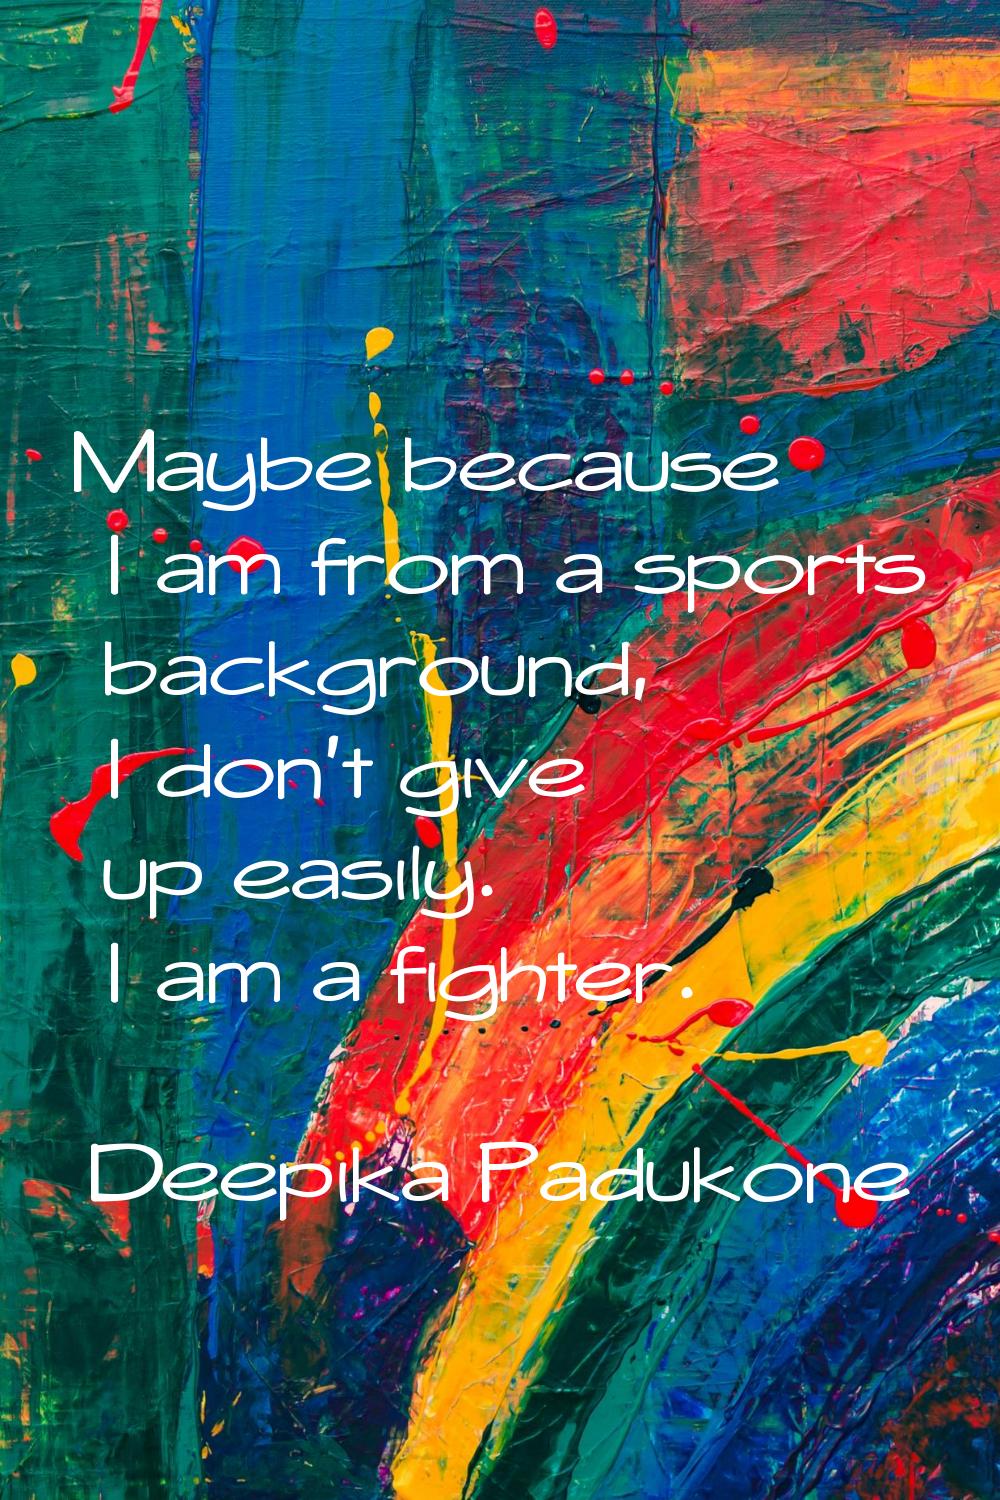 Maybe because I am from a sports background, I don't give up easily. I am a fighter.